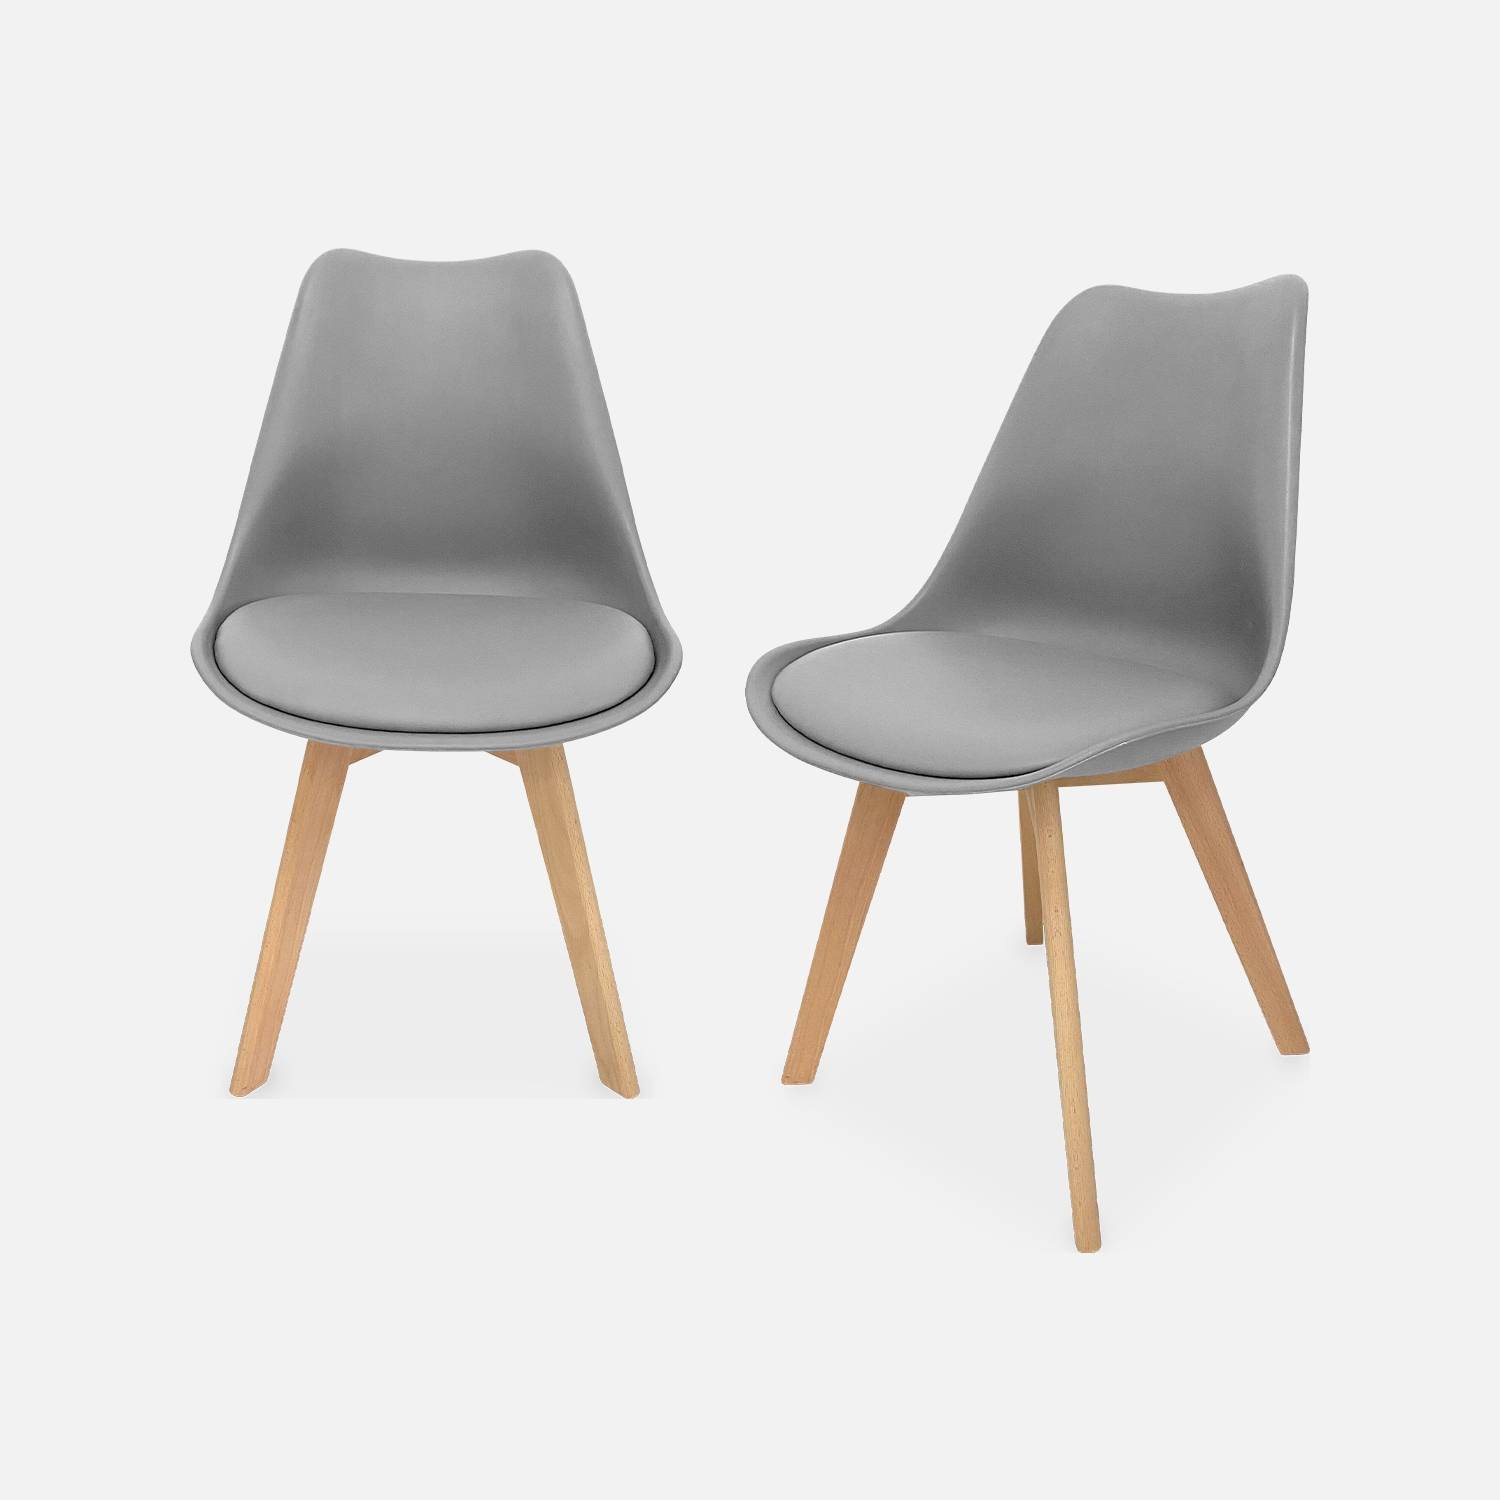 Pair of scandi-style dining chairs, grey | sweeek